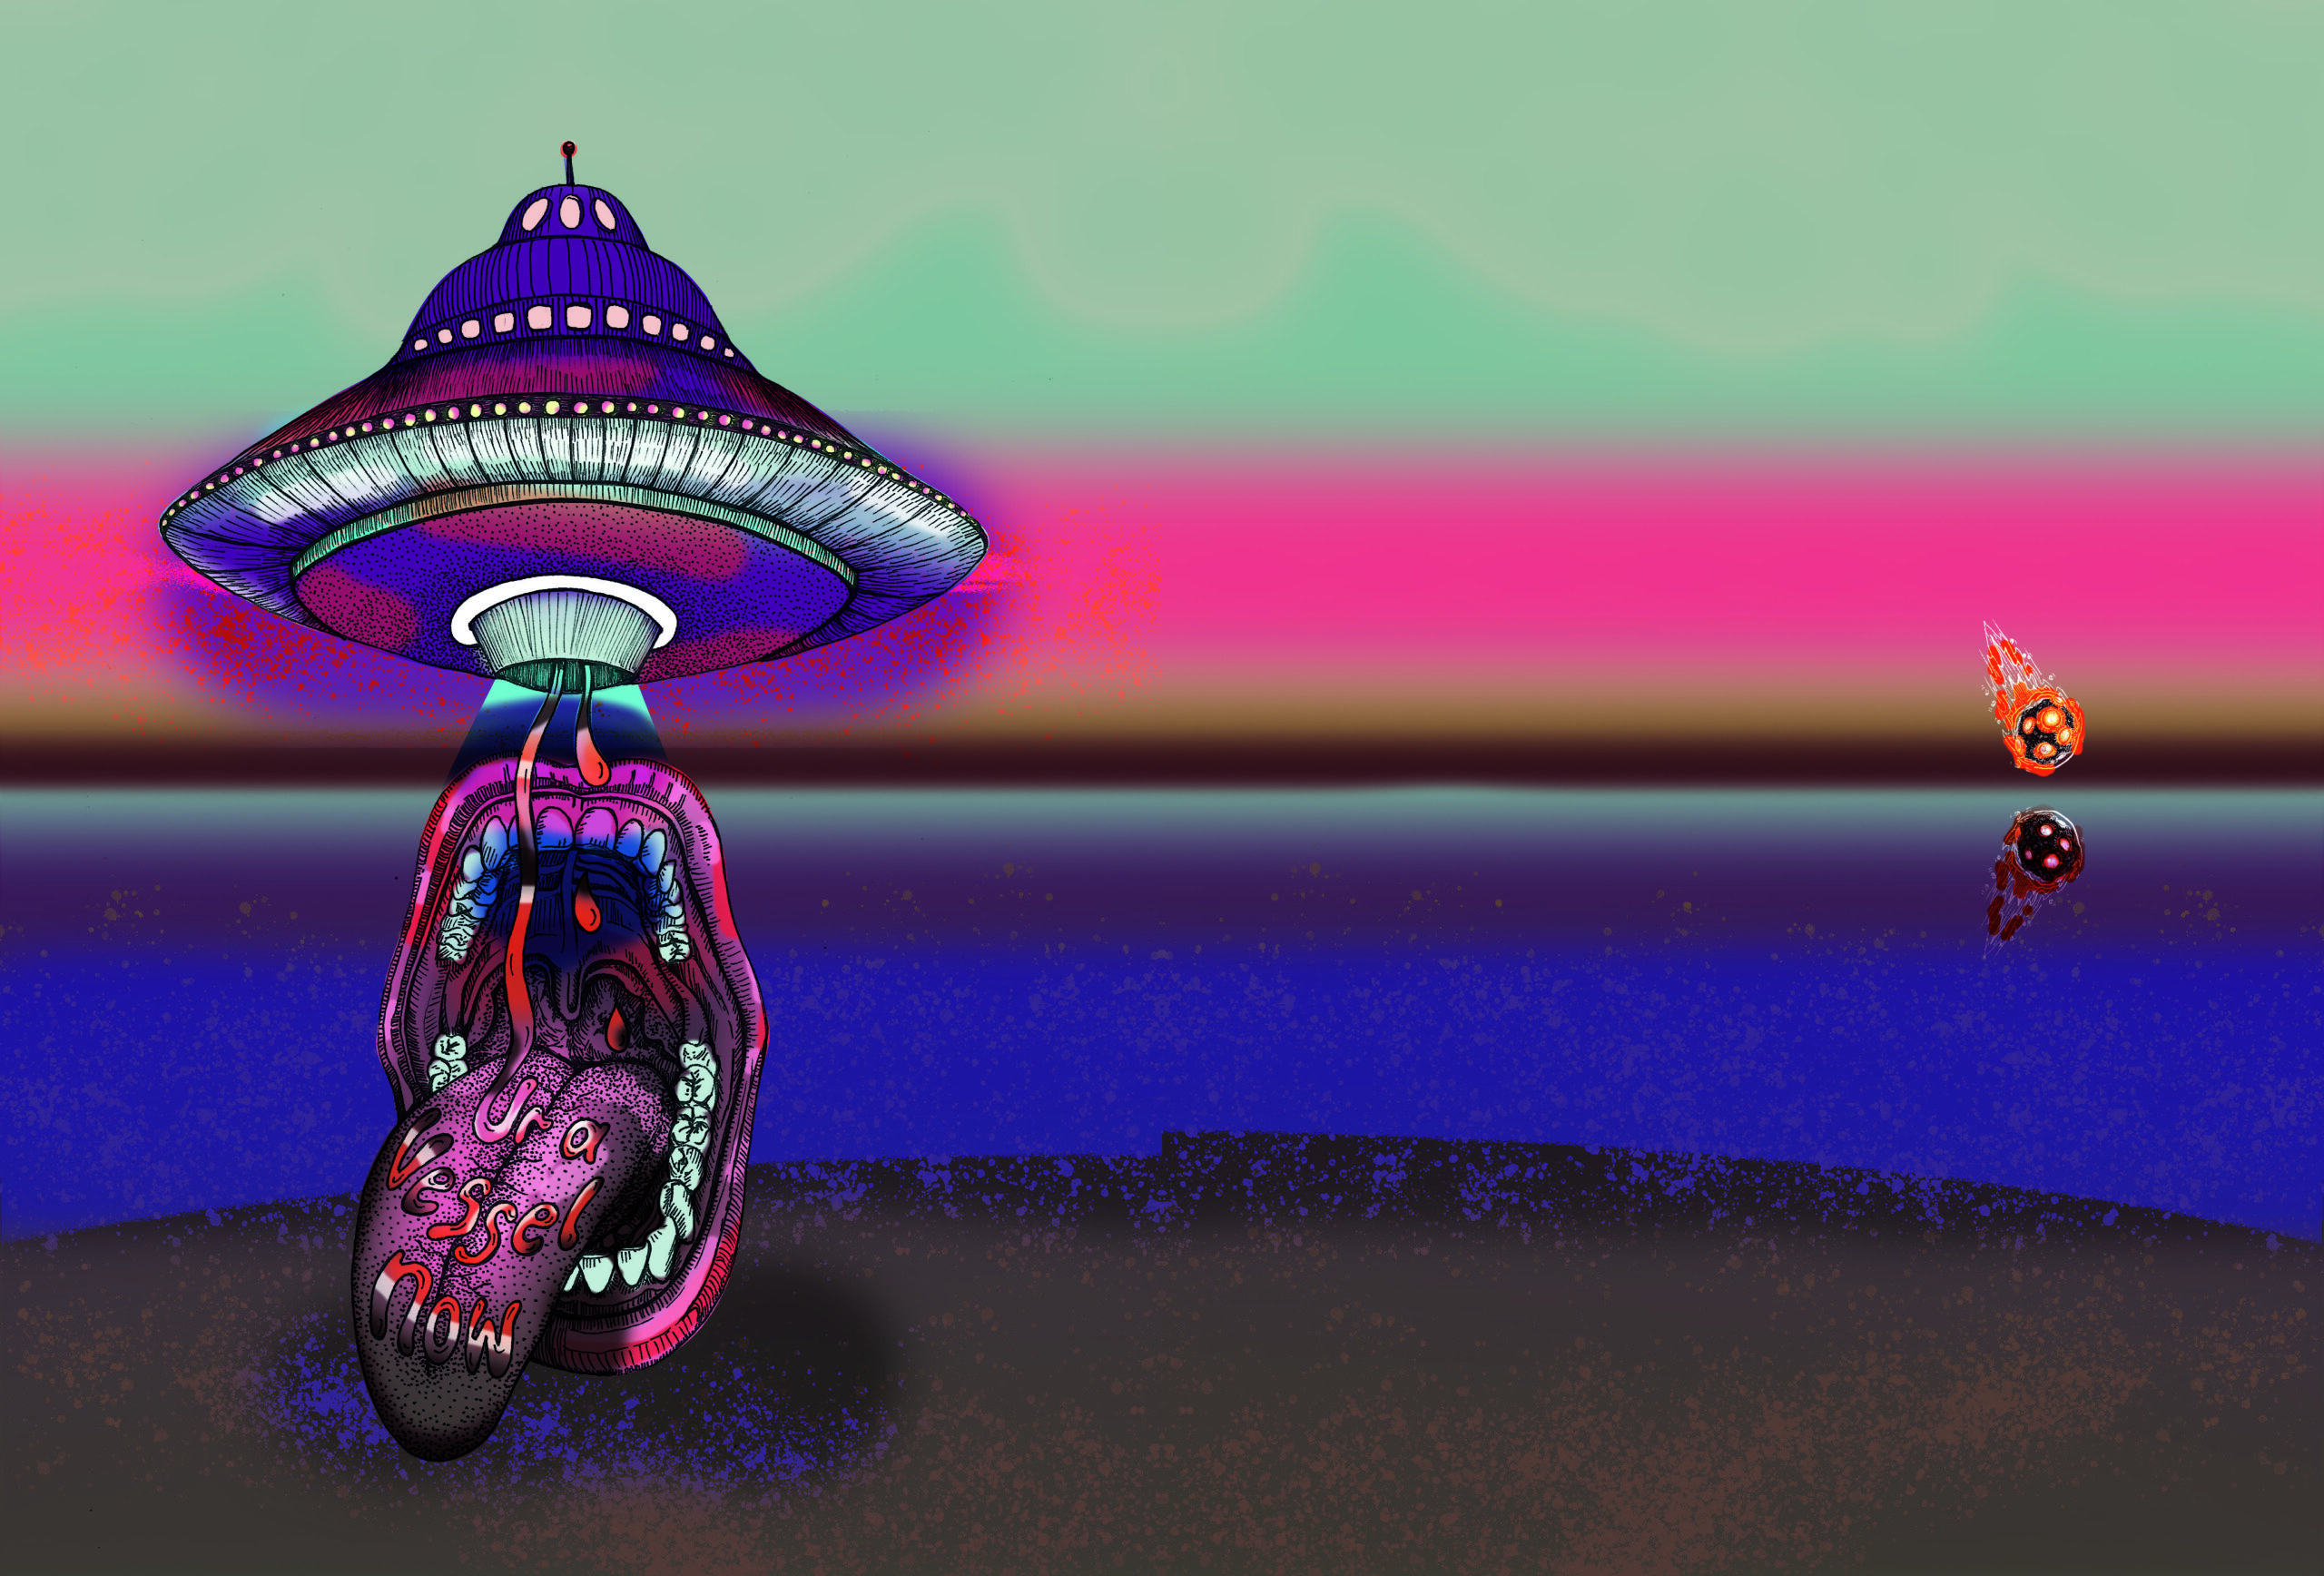 A surreal illustration of a spaceship hovering in a neon landscapewith an open mouth and tongue dangling below it.